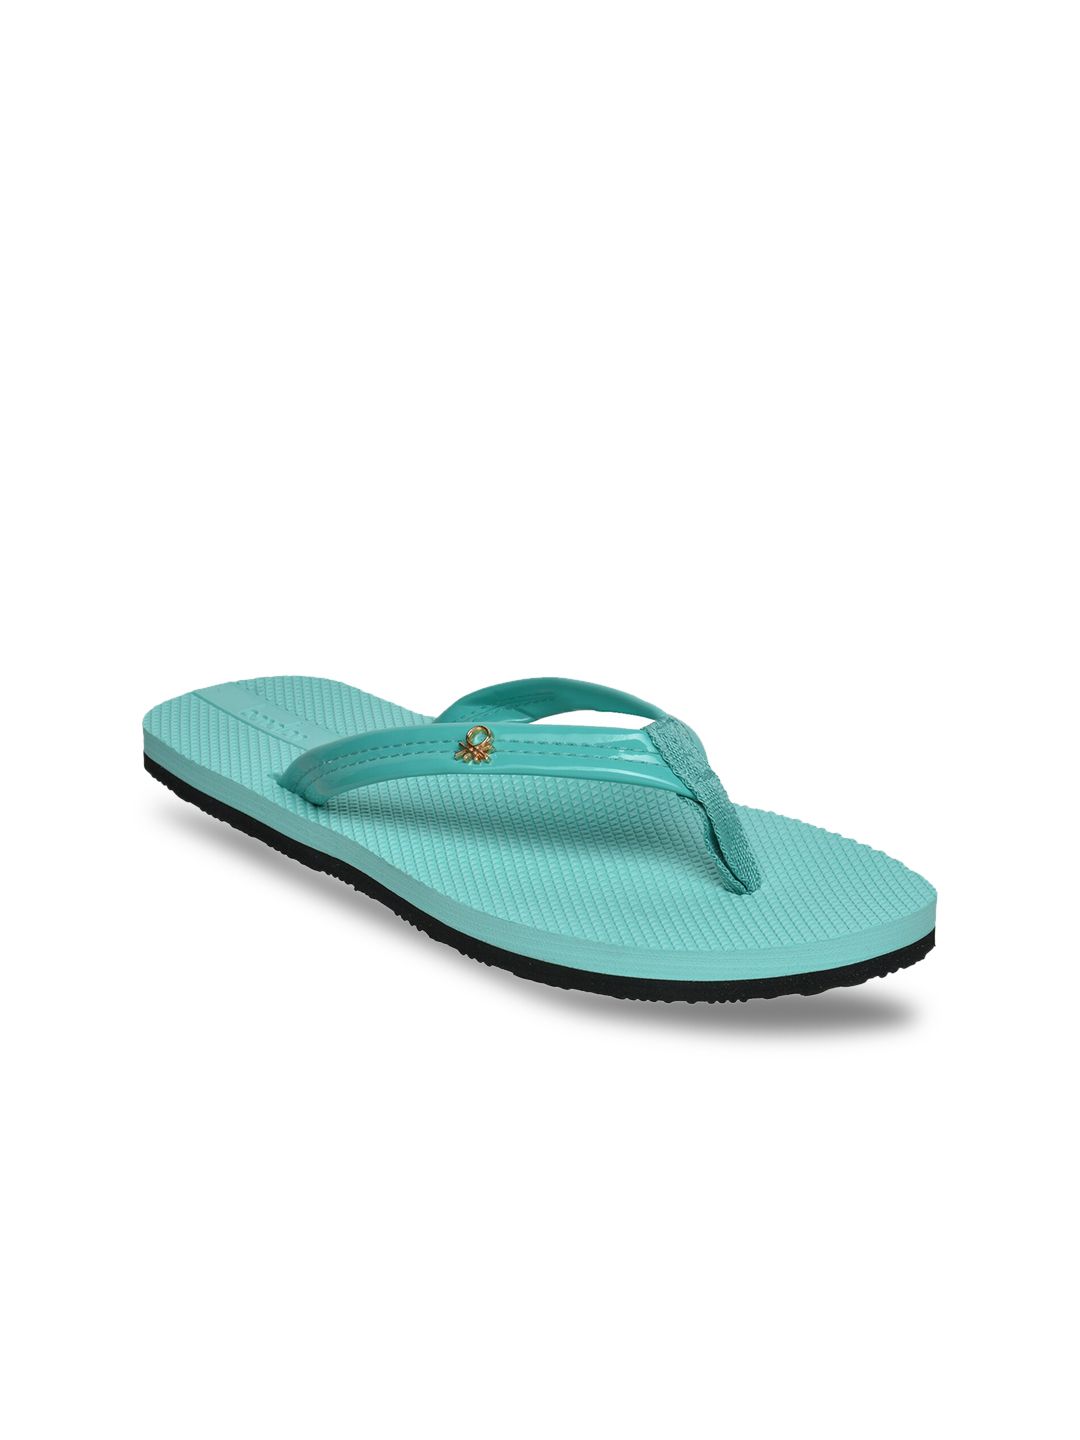 United Colors of Benetton Women Sea Green & Black Rubber Thong Flip-Flops Price in India